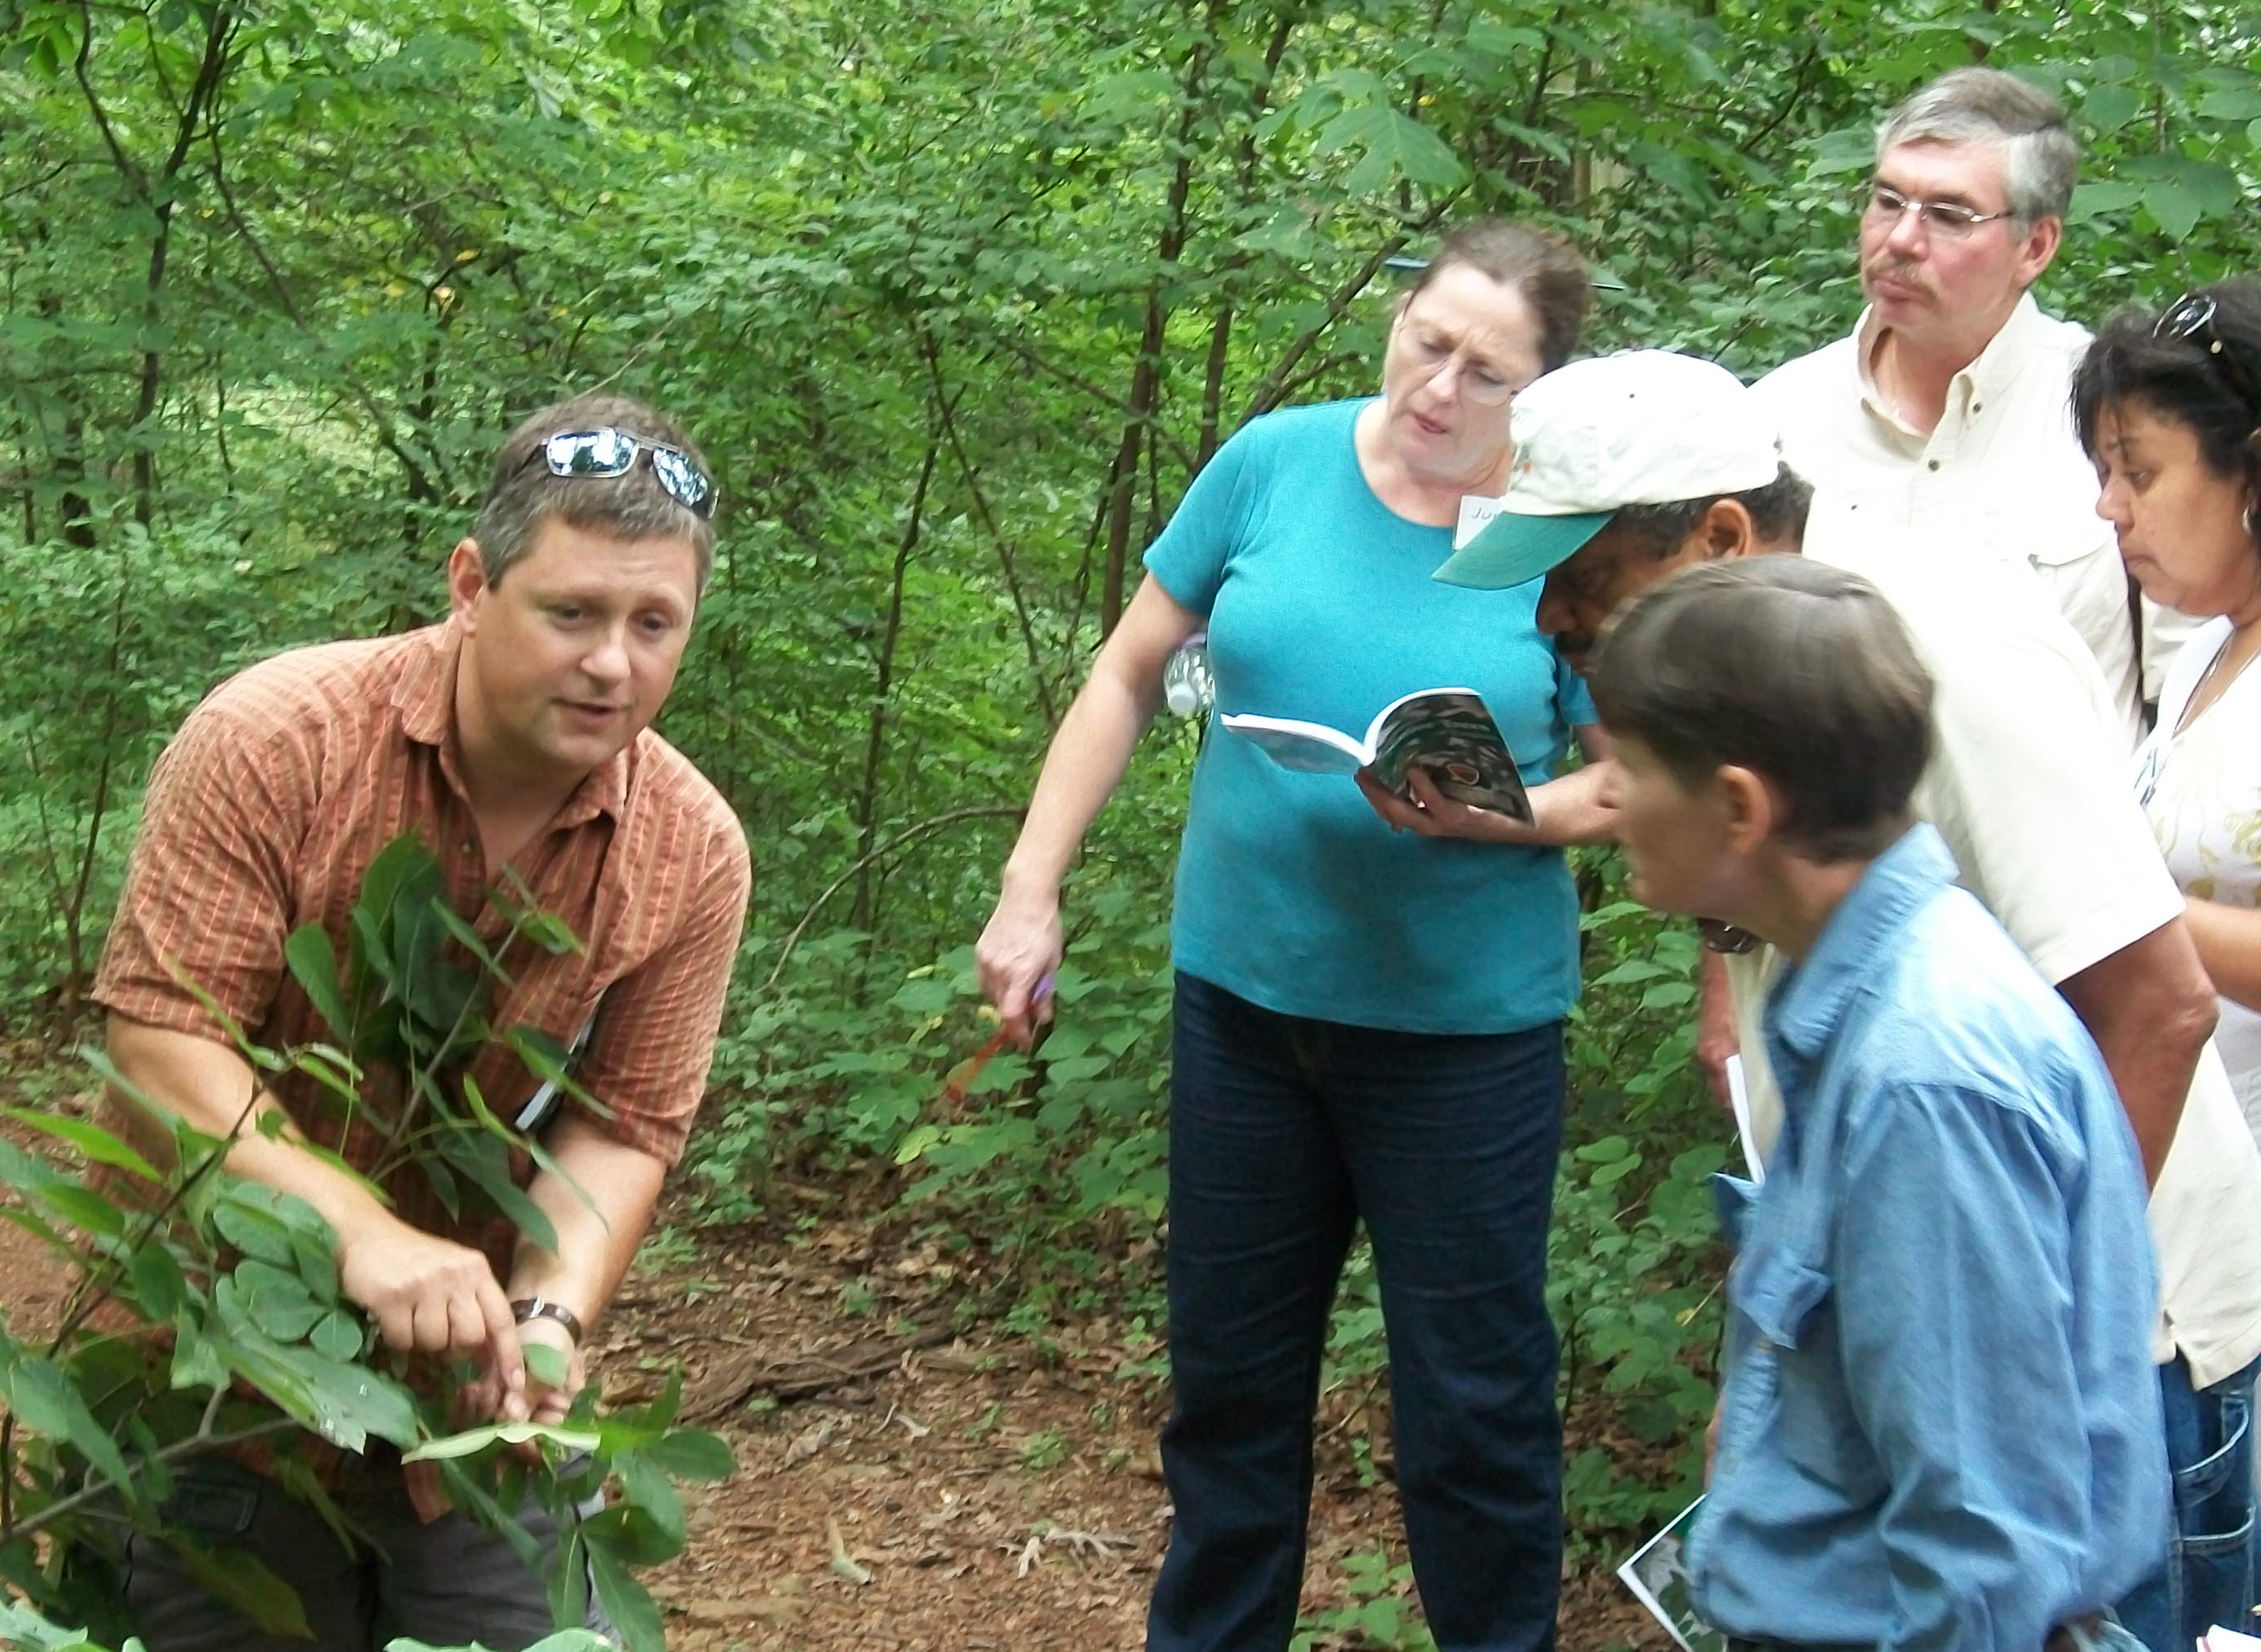 In a forest setting, John Peterson points to leaves on a bush while students look on.